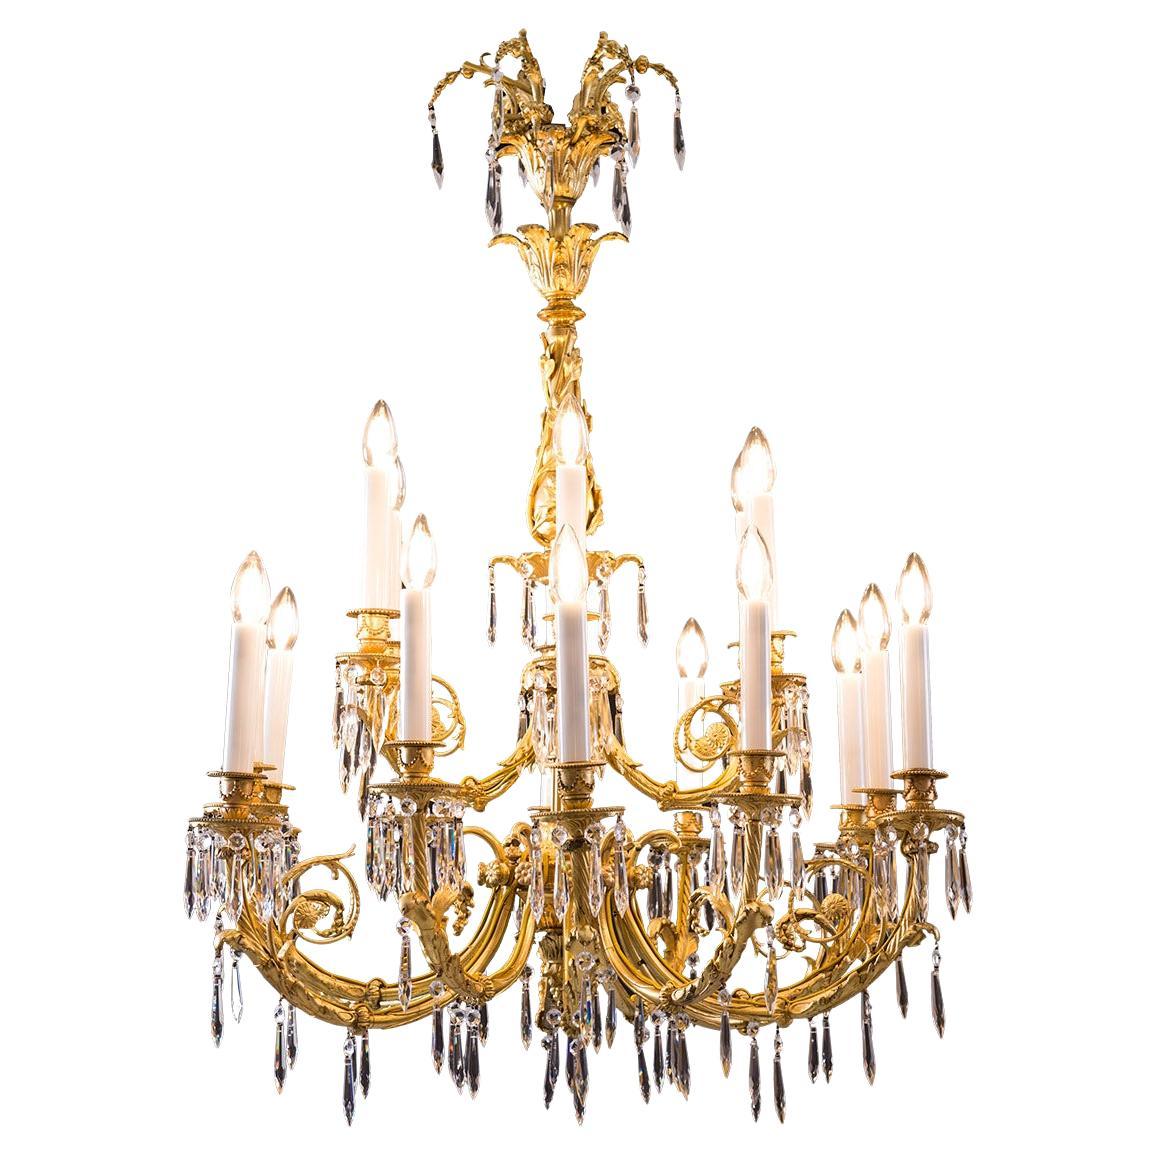 Original from 1880 Austro Hungary Baroque Style Chandelier, Gidet Brass For Sale